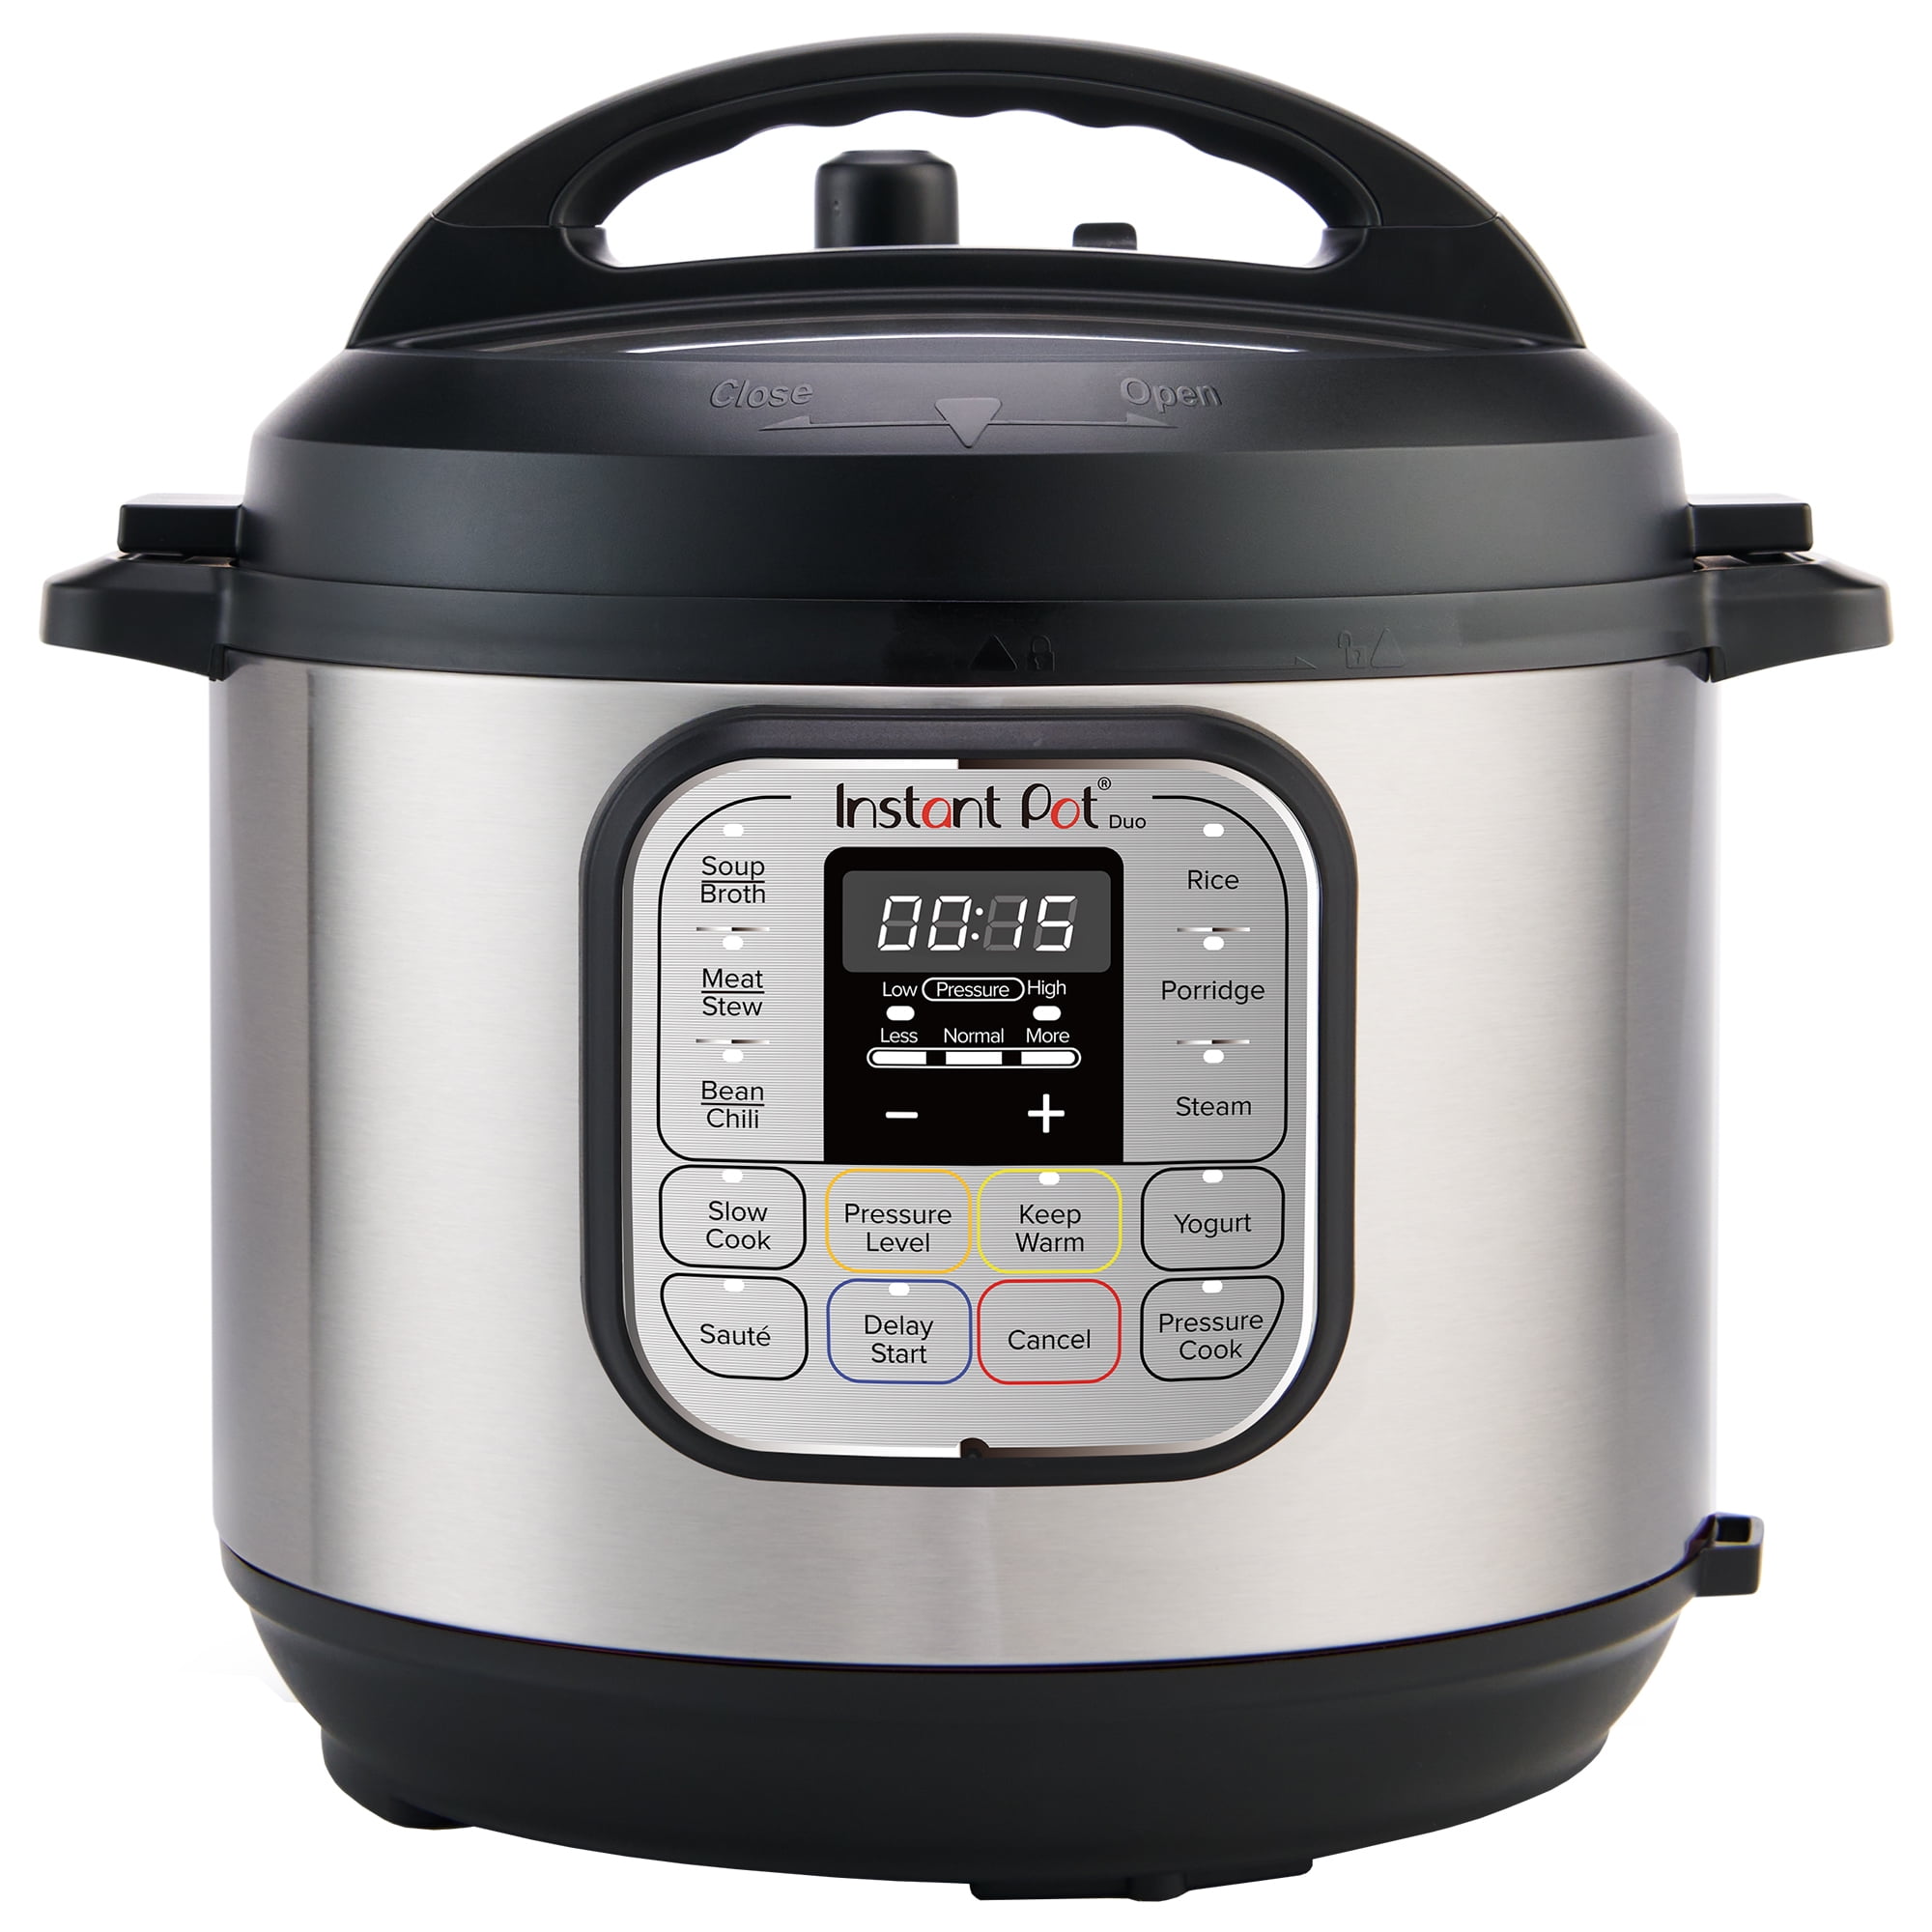 5.5 Litre 6 Qt 1000 W, Details about   Instant Pot Duo 7-in-1 Electric Pressure Cooker 